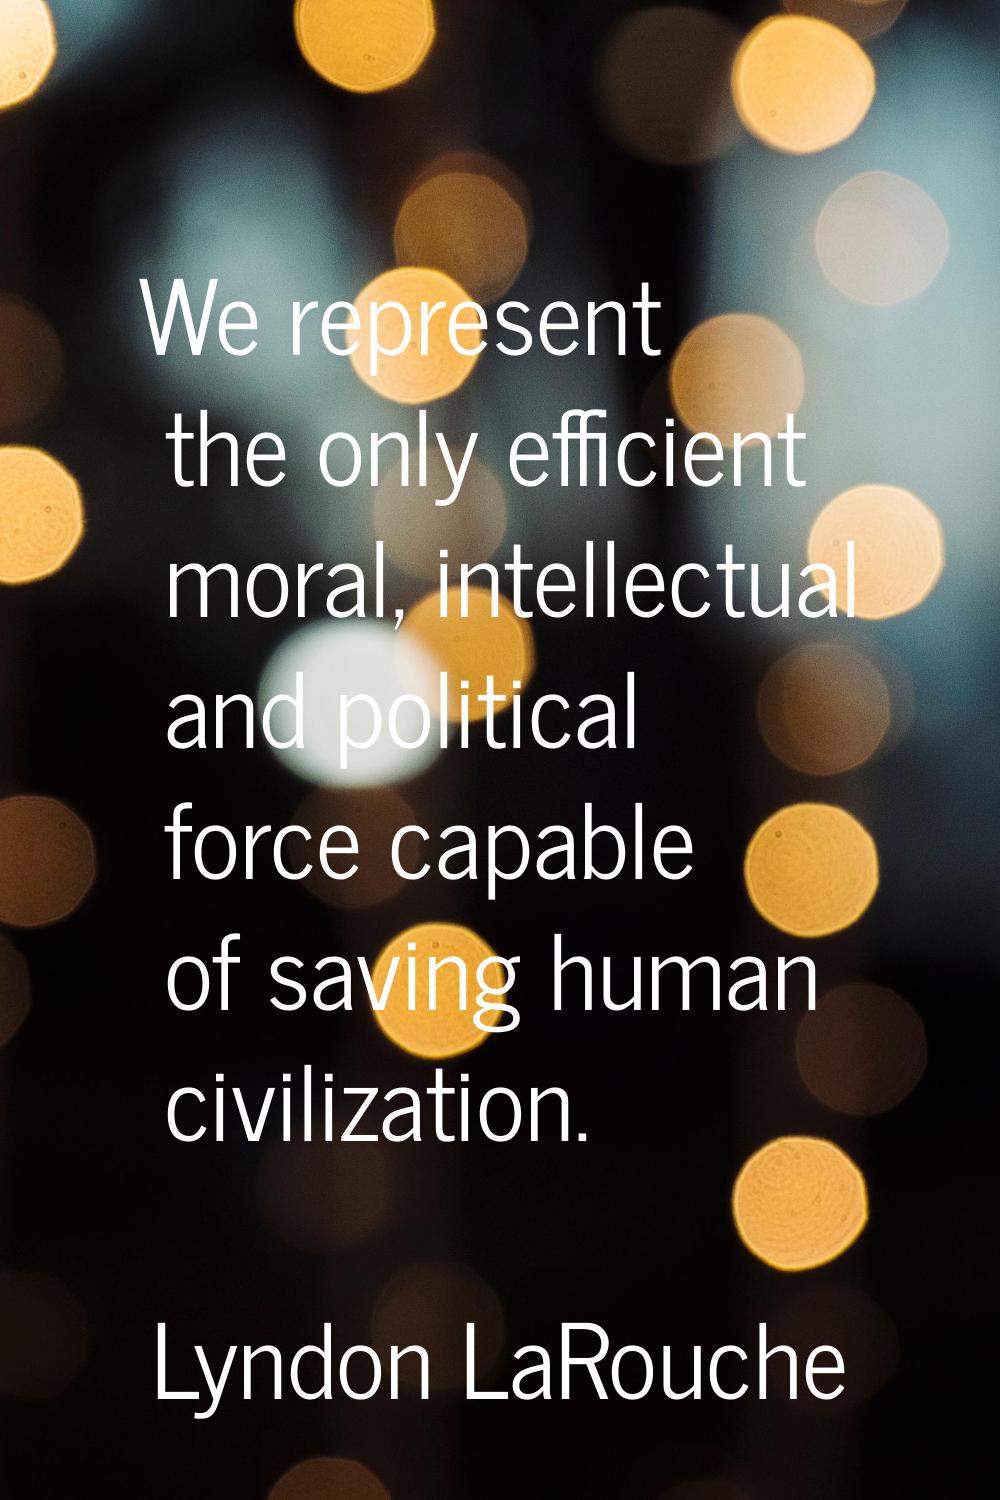 We represent the only efficient moral, intellectual and political force capable of saving human civ